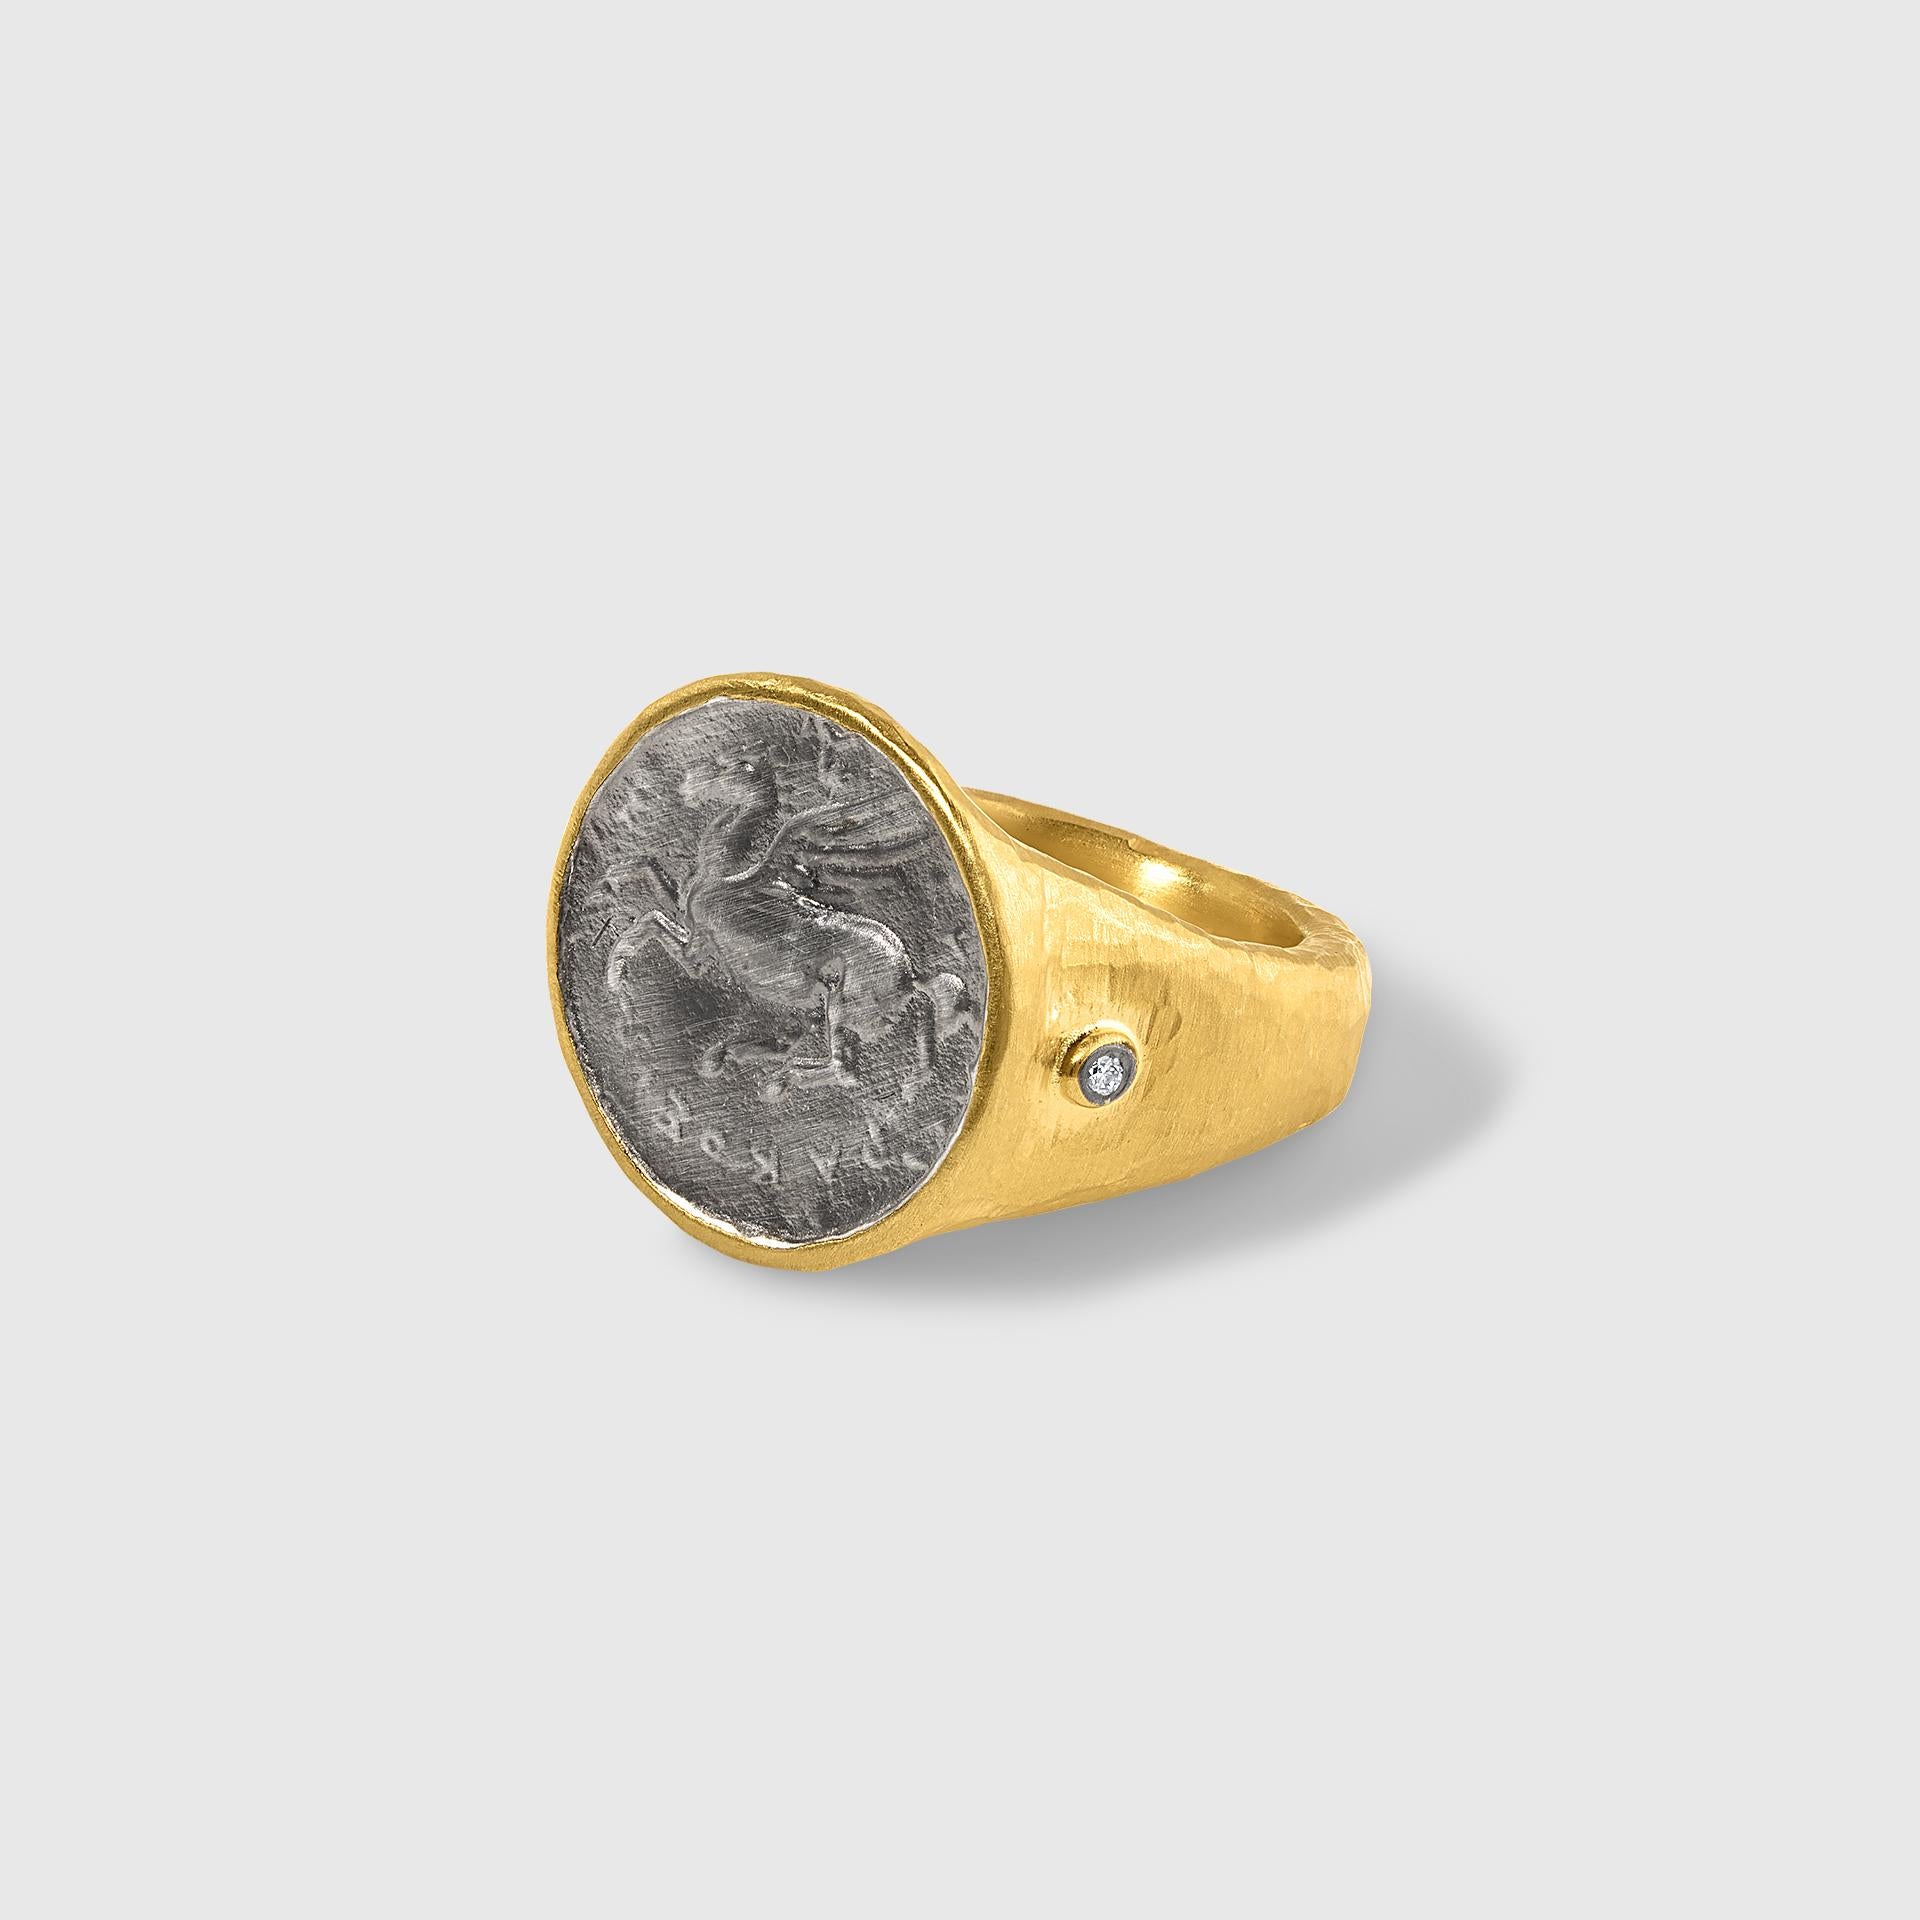 Pegasus Coin Statement Cocktail Ring with Diamonds 24kt Yellow Gold and Silver B In New Condition For Sale In Bozeman, MT